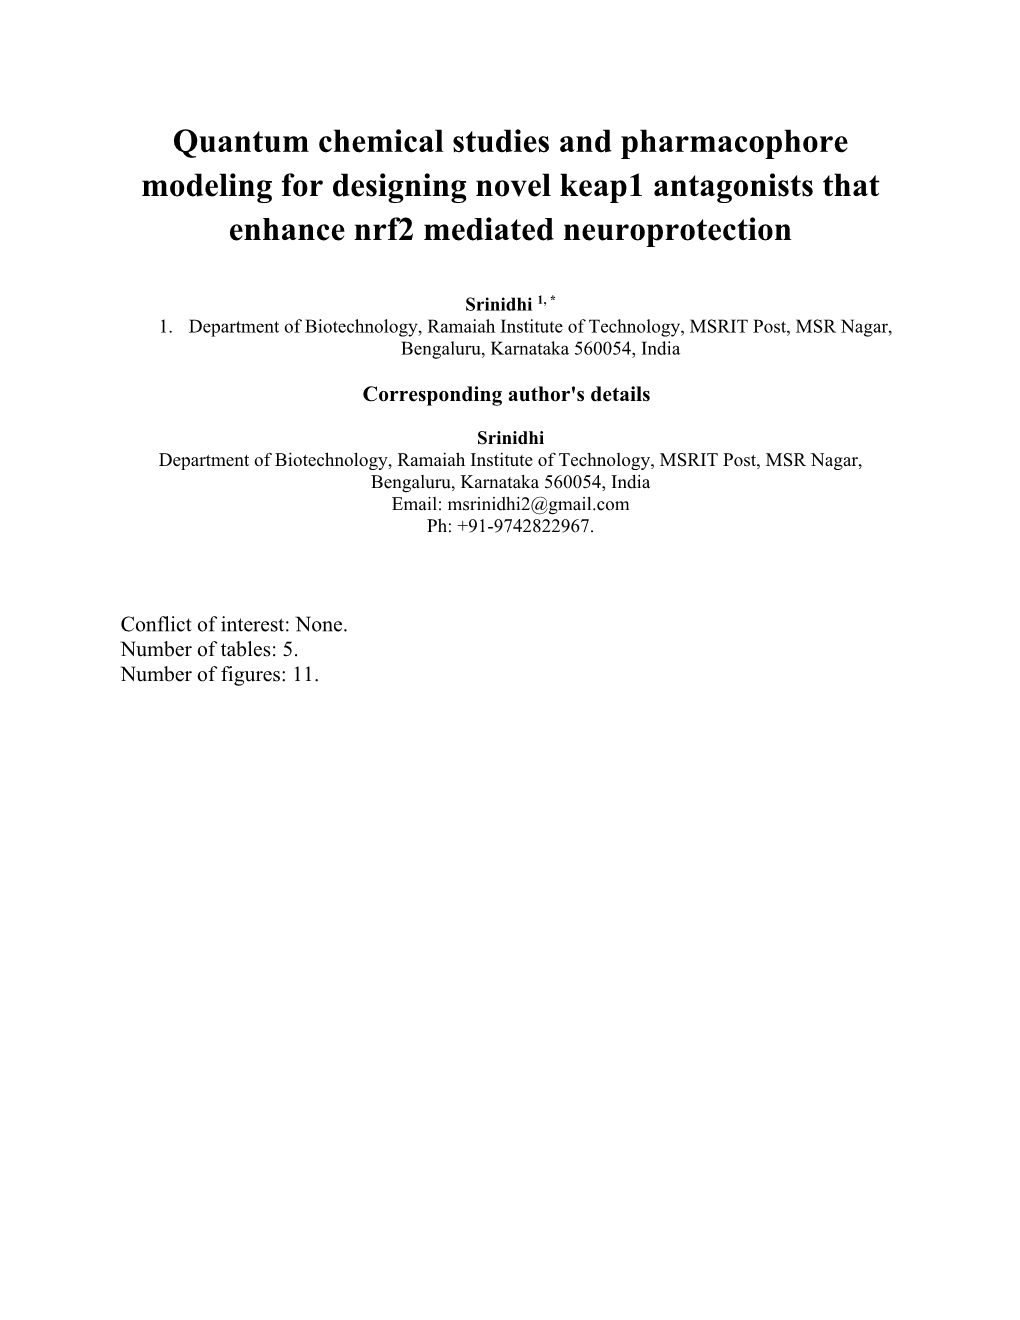 Quantum Chemical Studies and Pharmacophore Modeling for Designing Novel Keap1 Antagonists That Enhance Nrf2 Mediated Neuroprotection